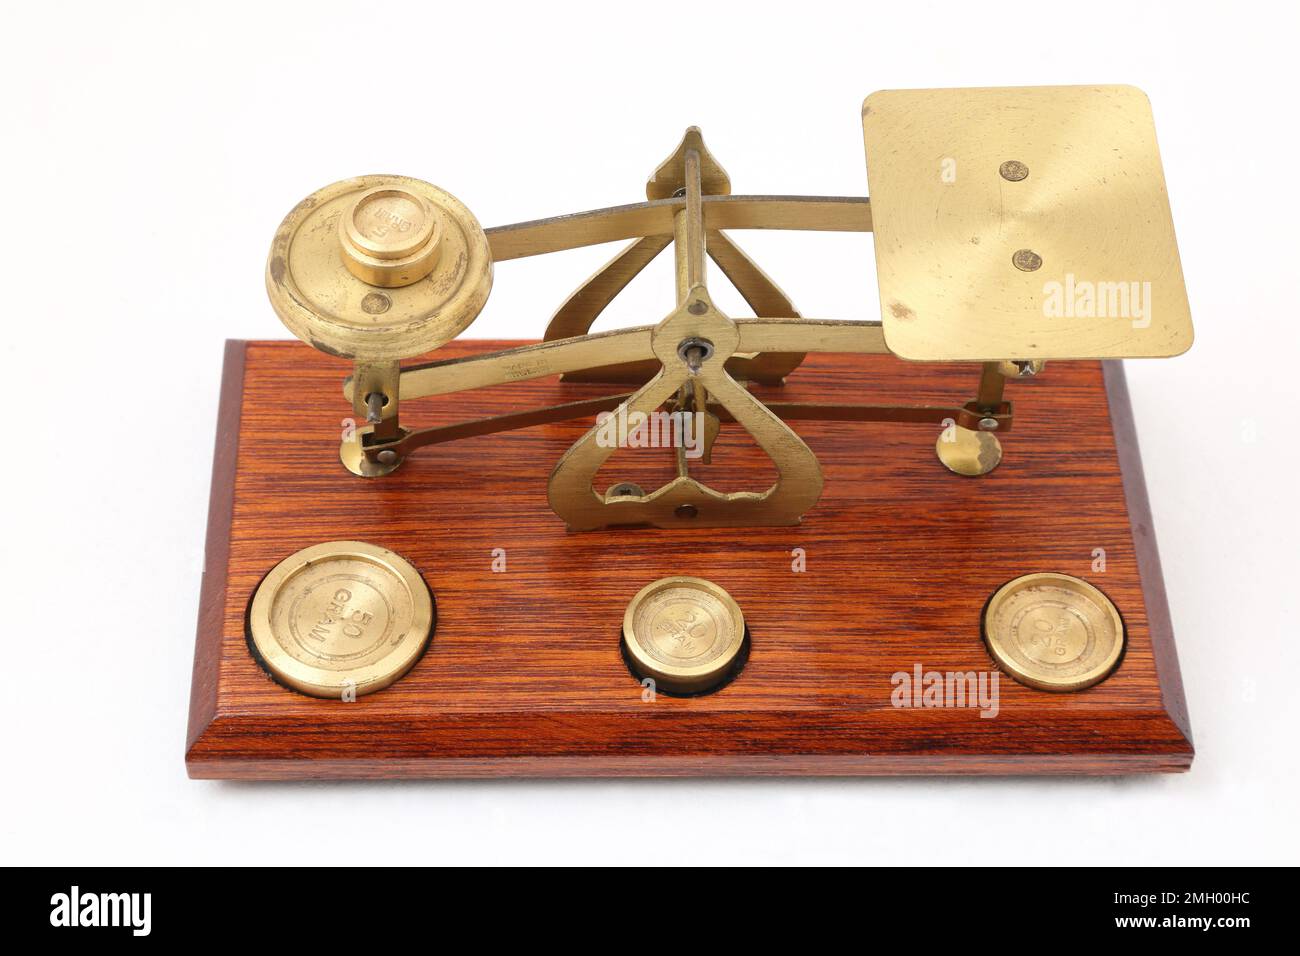 Vintage Brass and Wood Weighing Scales with Weights Stock Photo